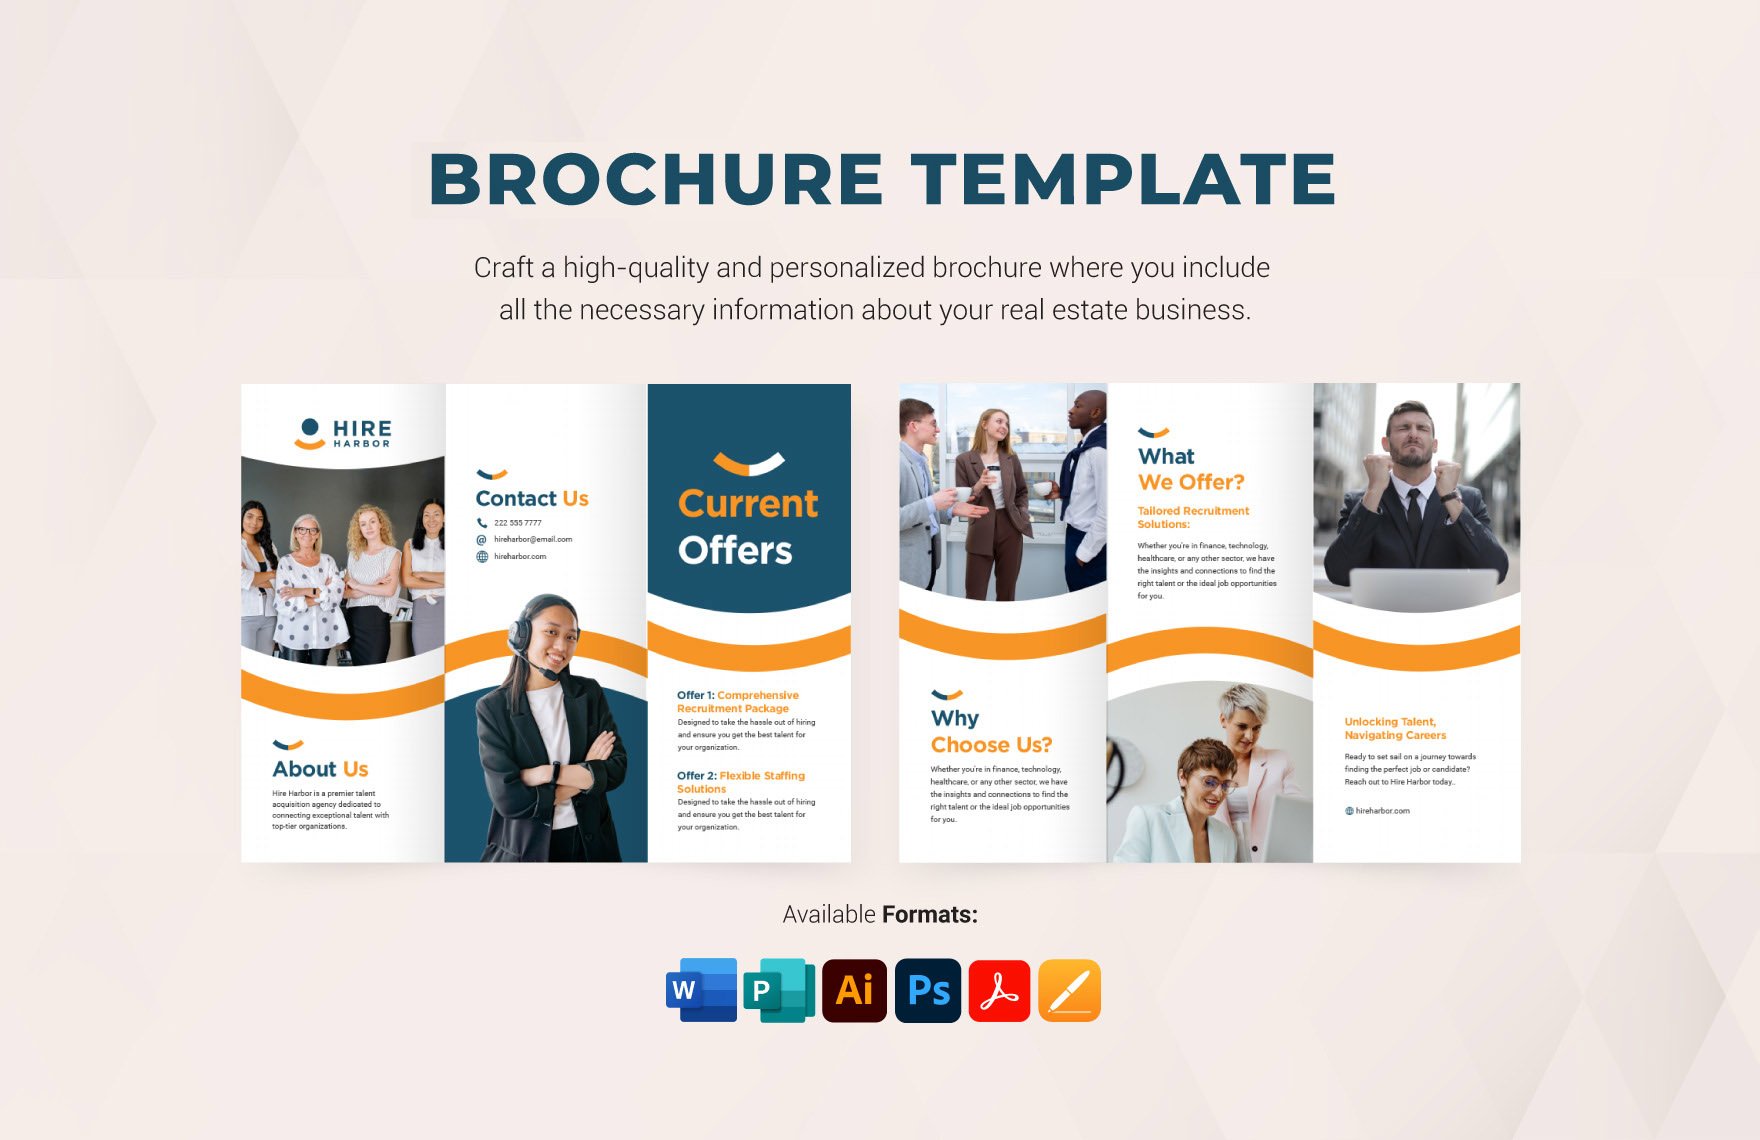 Free Brochure Template in Word, PDF, Illustrator, PSD, Apple Pages, Publisher